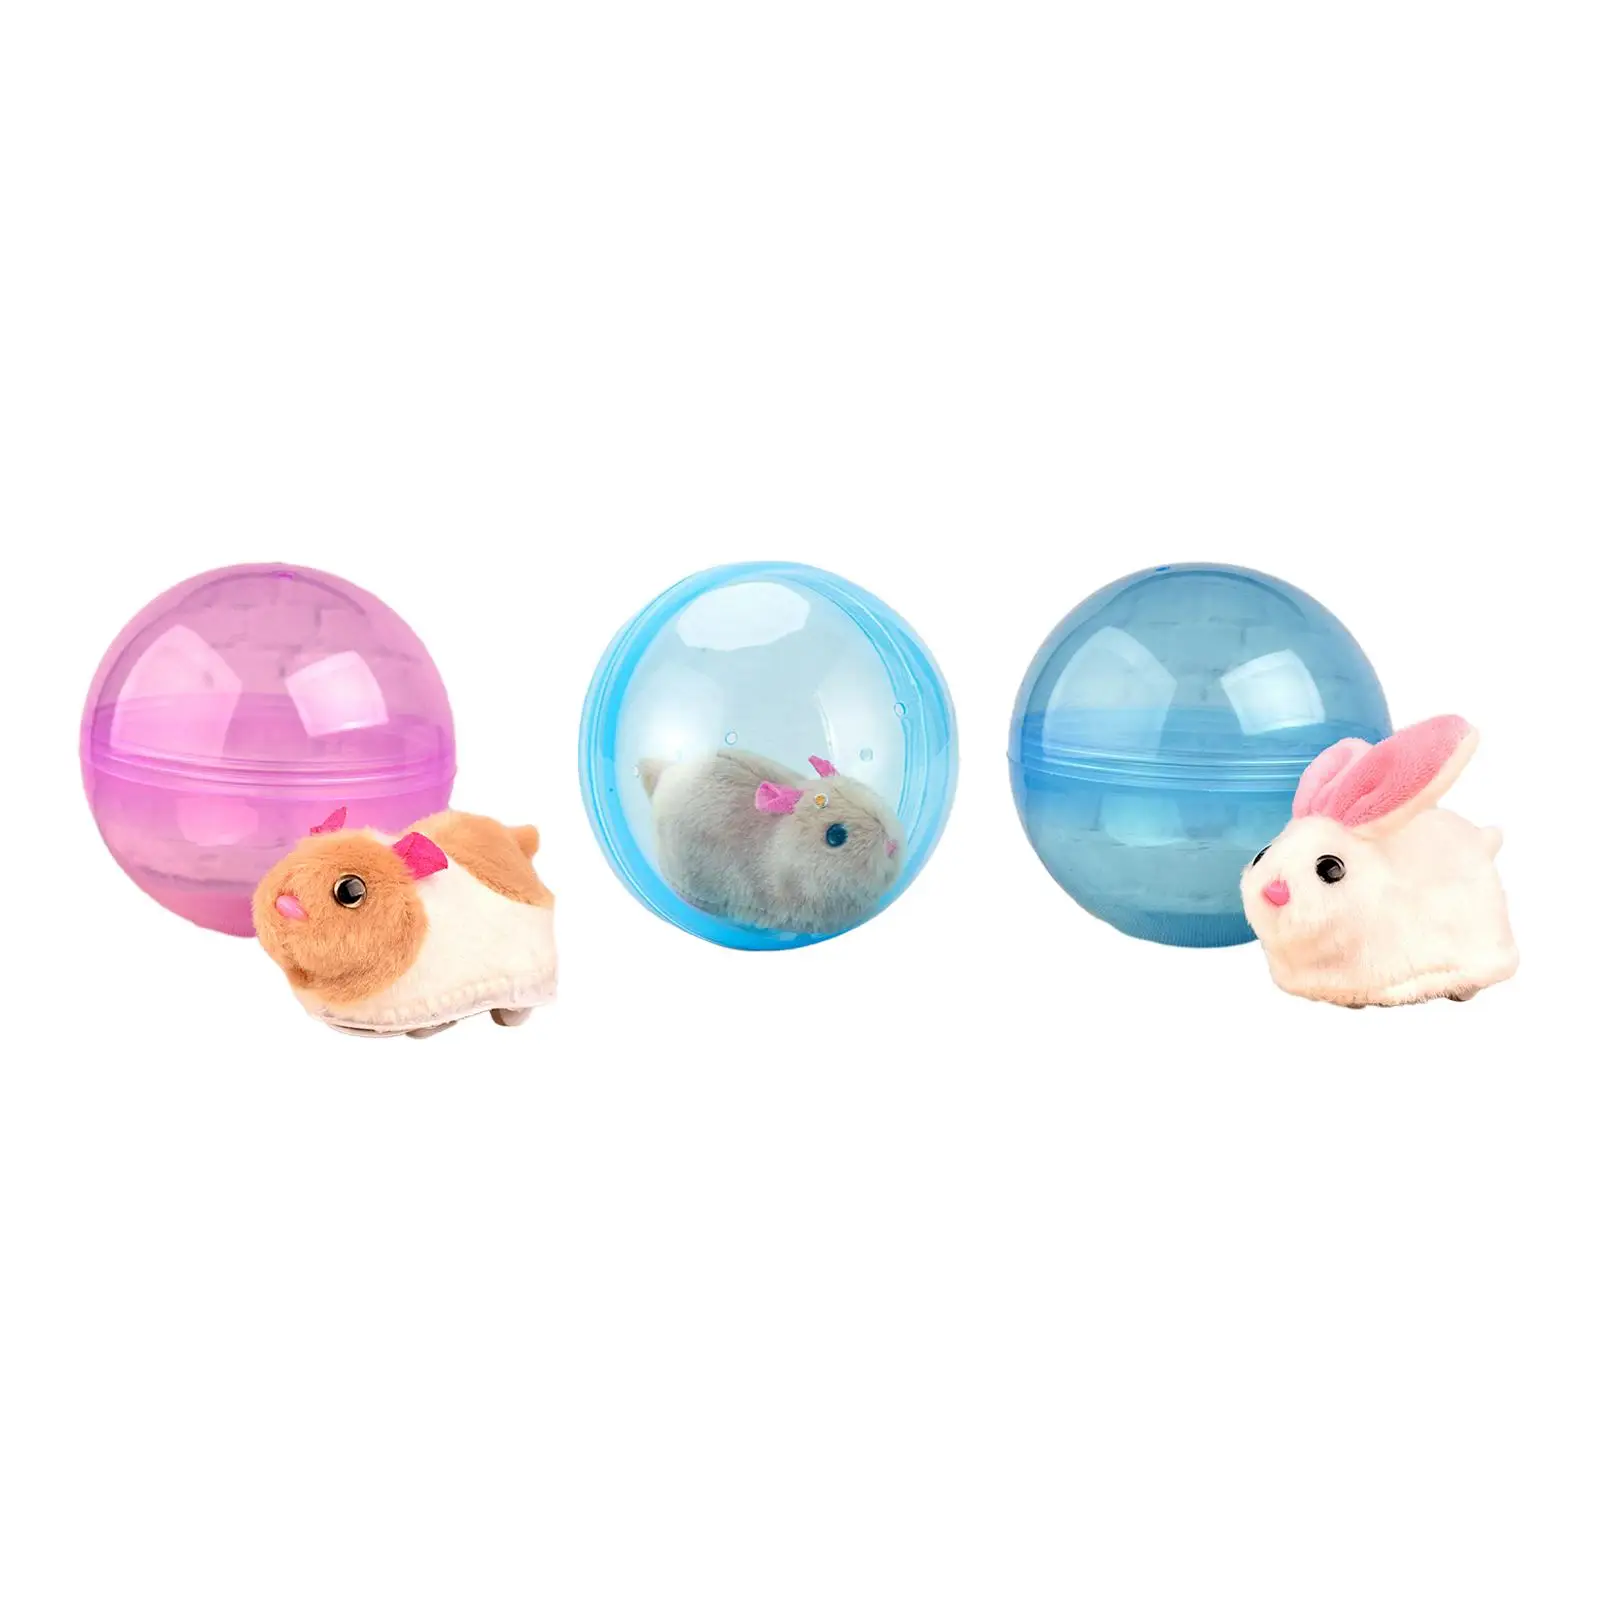 Electric Ball Toys Interactive Enjoy Fun Electronic Pets Toy Early Educatioanal Toys for Toddlers Boys Kids Girls Birthday Gifts